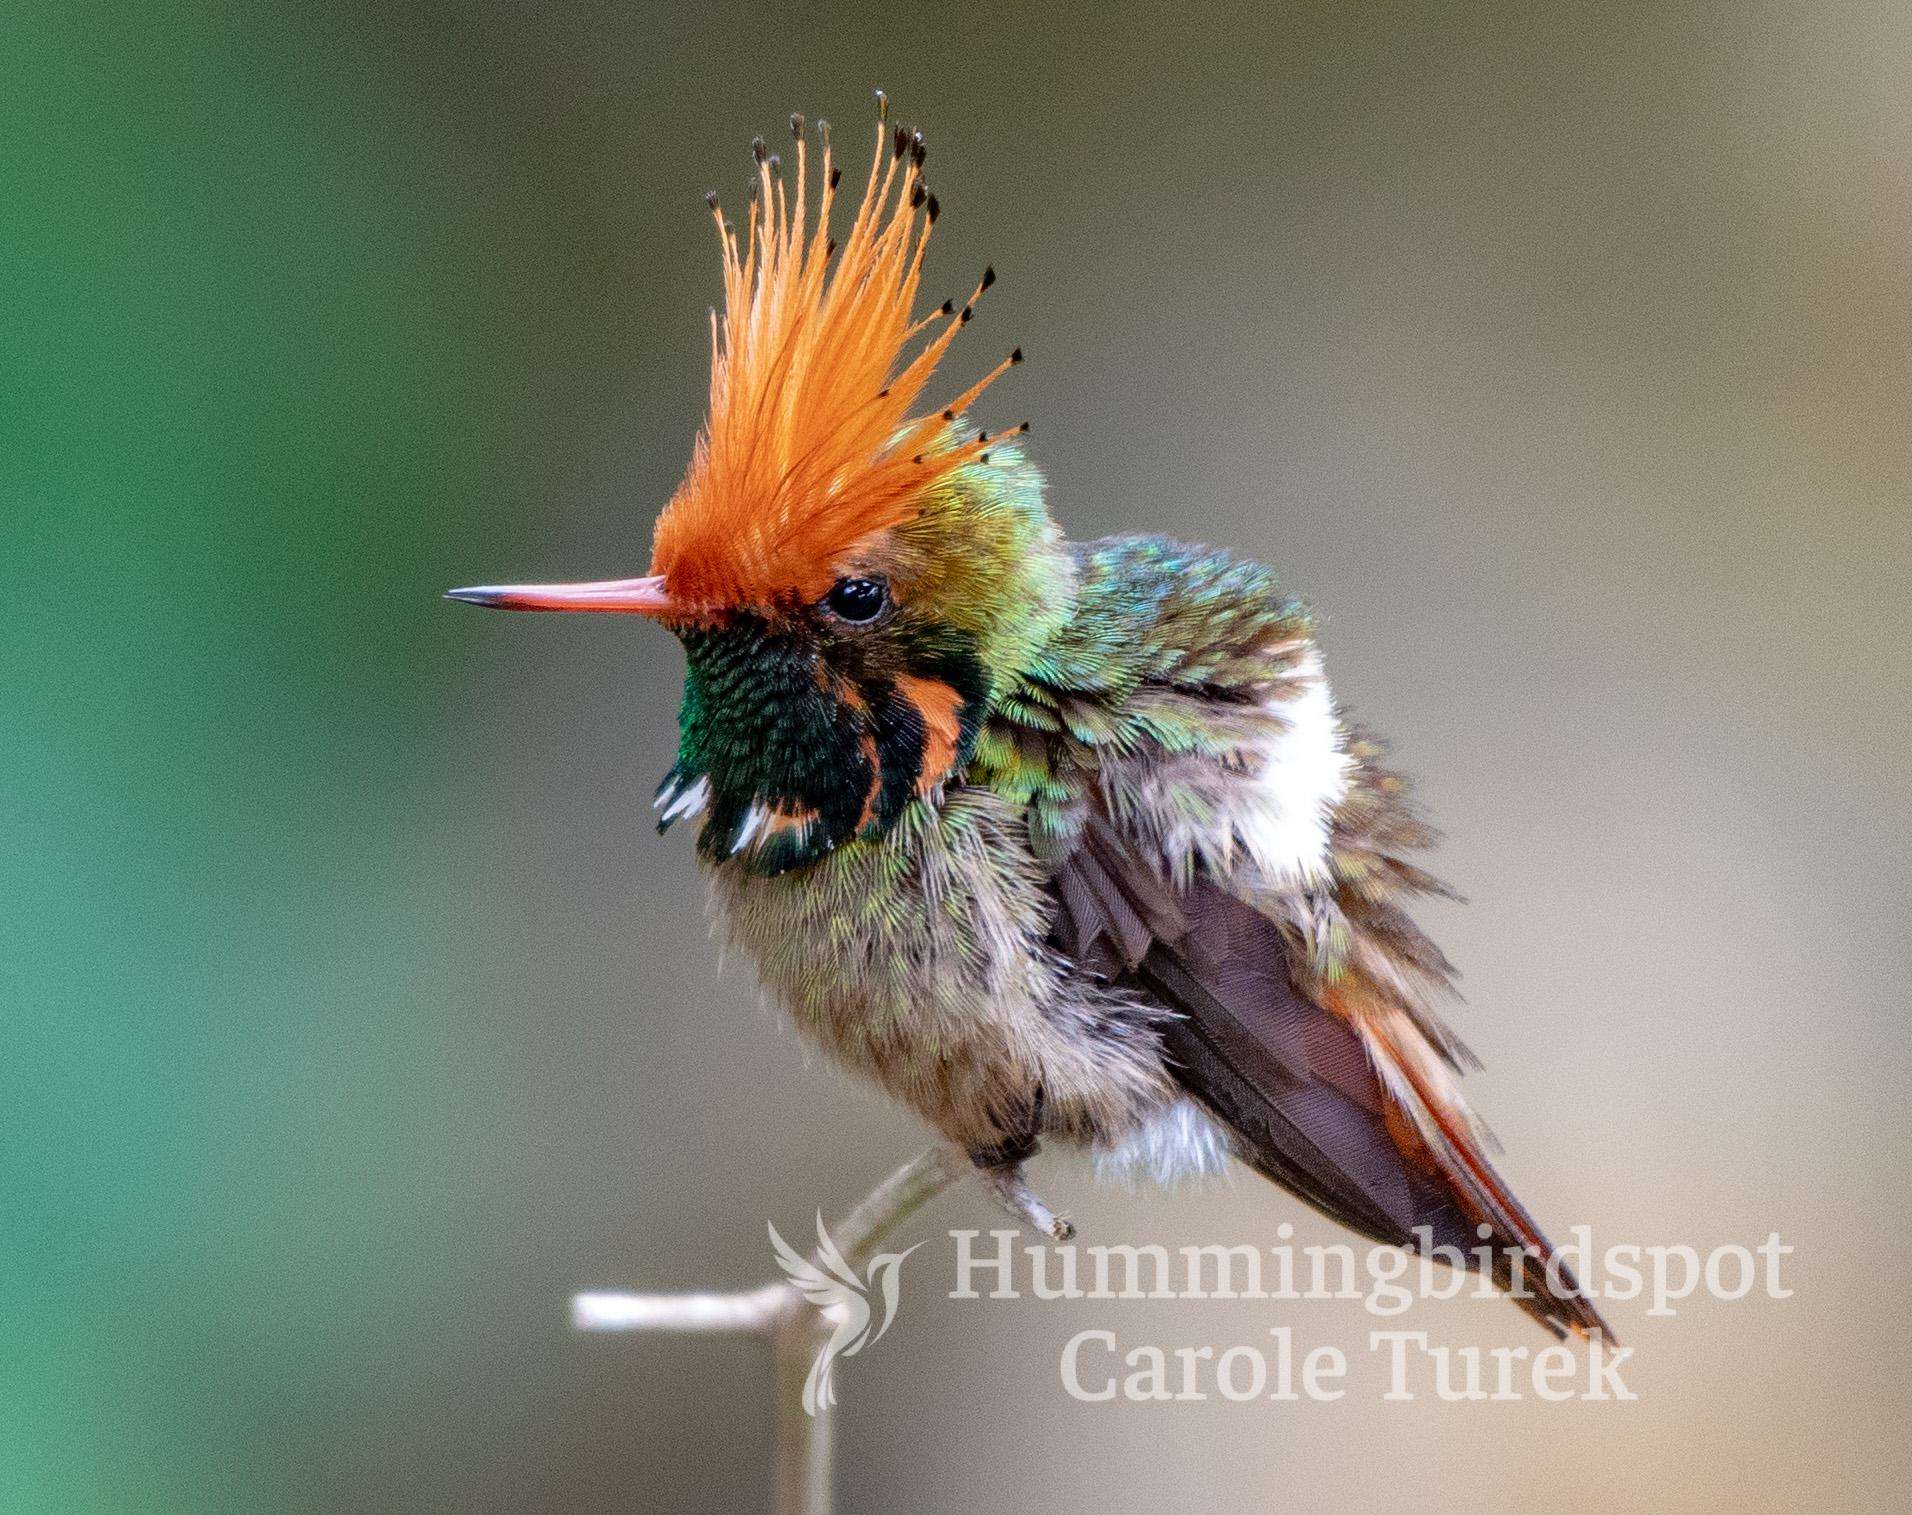 Rufous-crested Coquette, photographed in Peru : aww